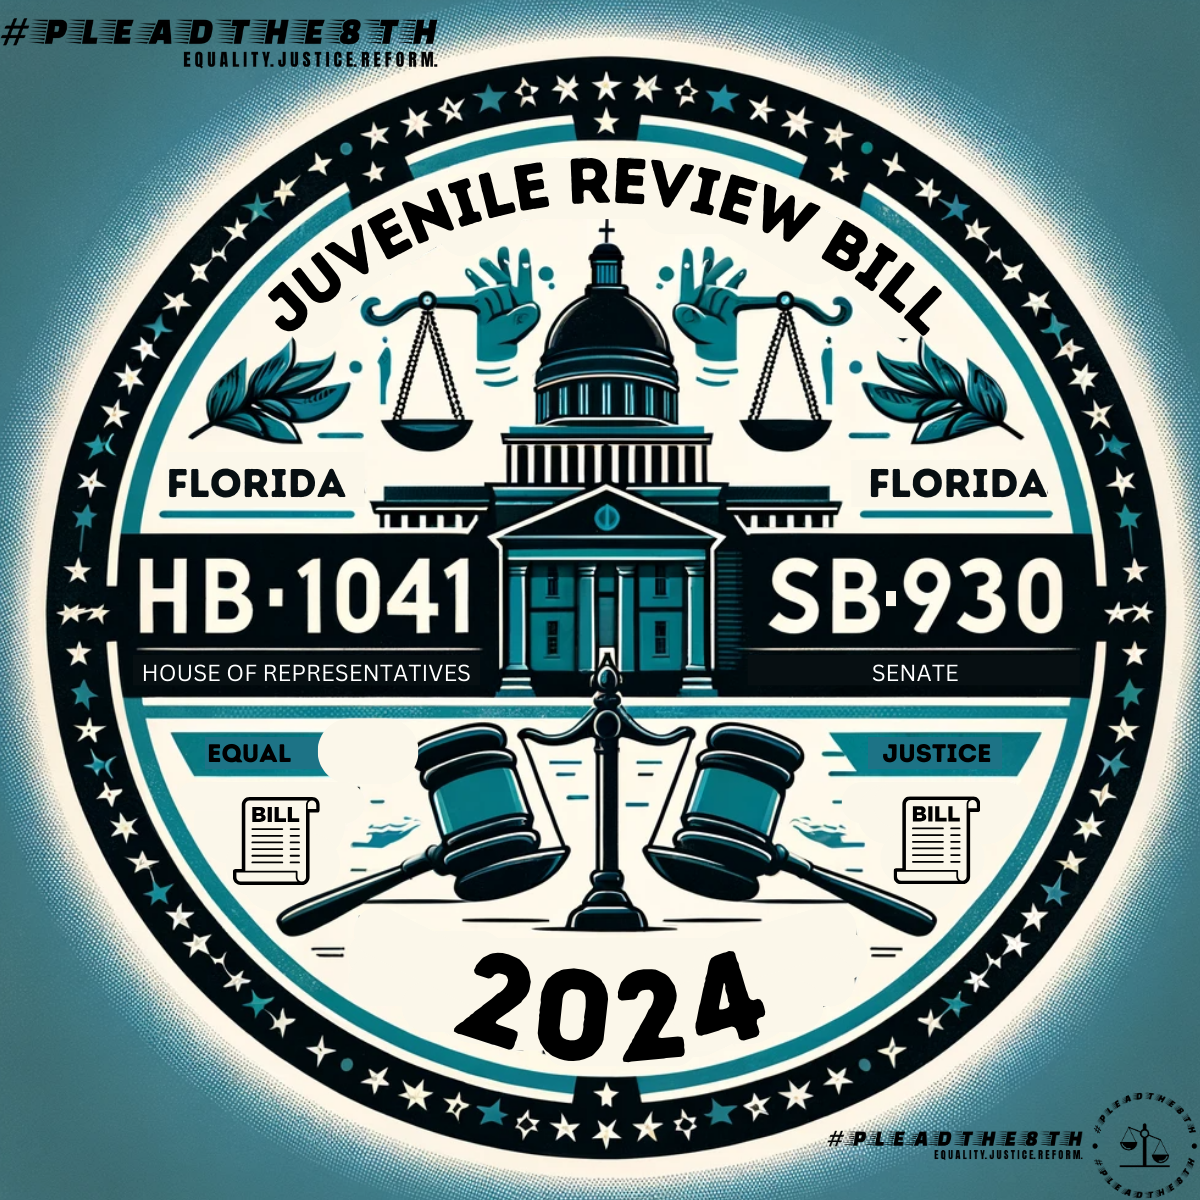 Graham v. Florida, Terrence Graham, PleadThe8th, Terrance Graham, Advocate, Educate, Equality, Justice, Eighth Amendment, #PleadThe8th, Terrence Graham, Graham v. Florida, SB930, HB1041, PleadThe8th